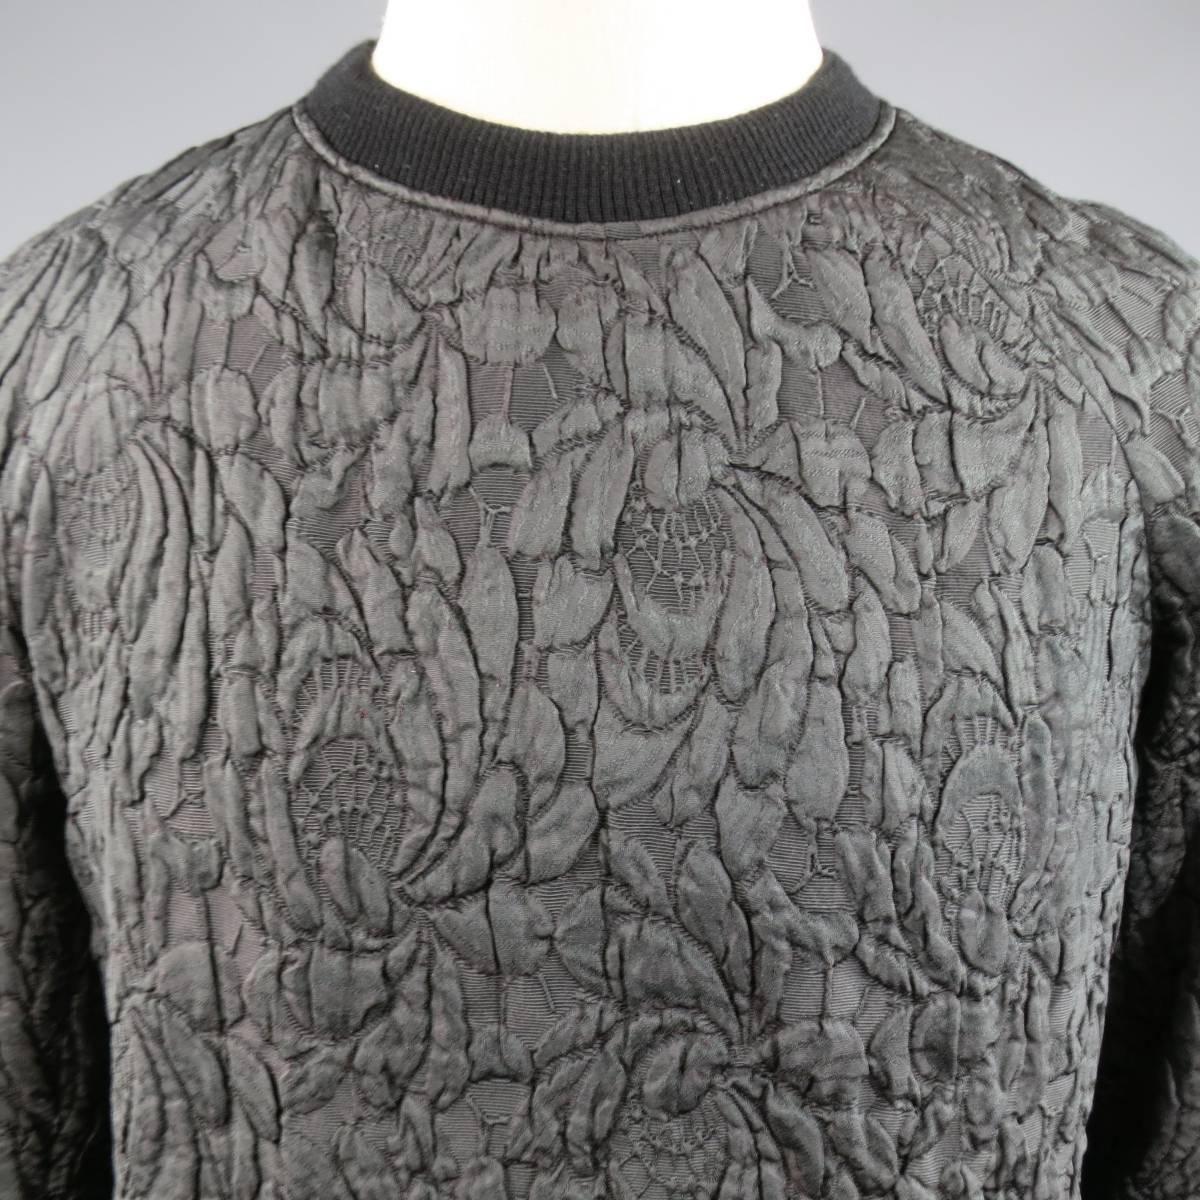 This unique unisex DRIES VAN NOTEN pullover comes in a deep green floral lace brocade with burgundy iridescence and features a ribbed black crewneck, raglan sleeves, and black under layer with red and gold print. Small imperfection on back. Made in